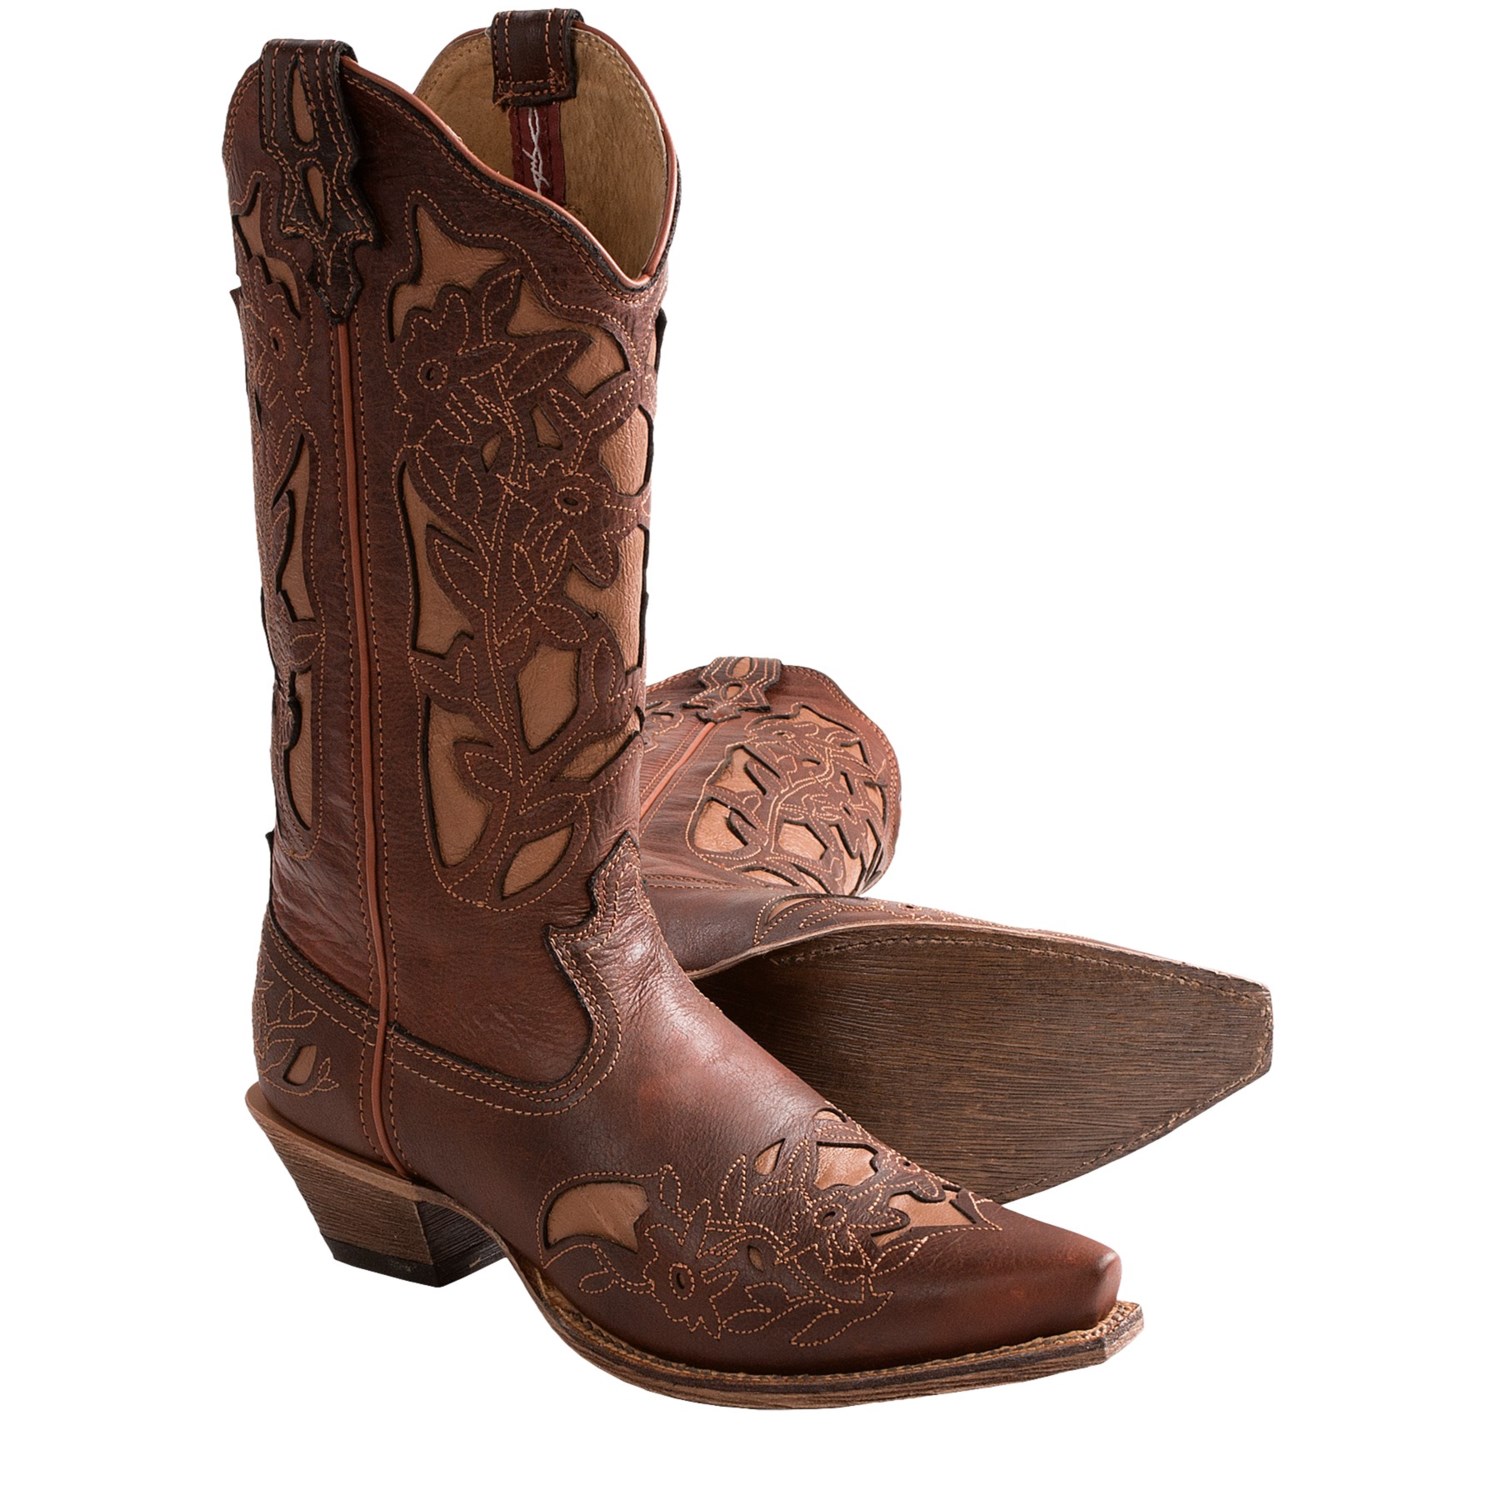 Twisted X Boots Steppin’ Out Cowboy Boots (For Women) 6527V 32